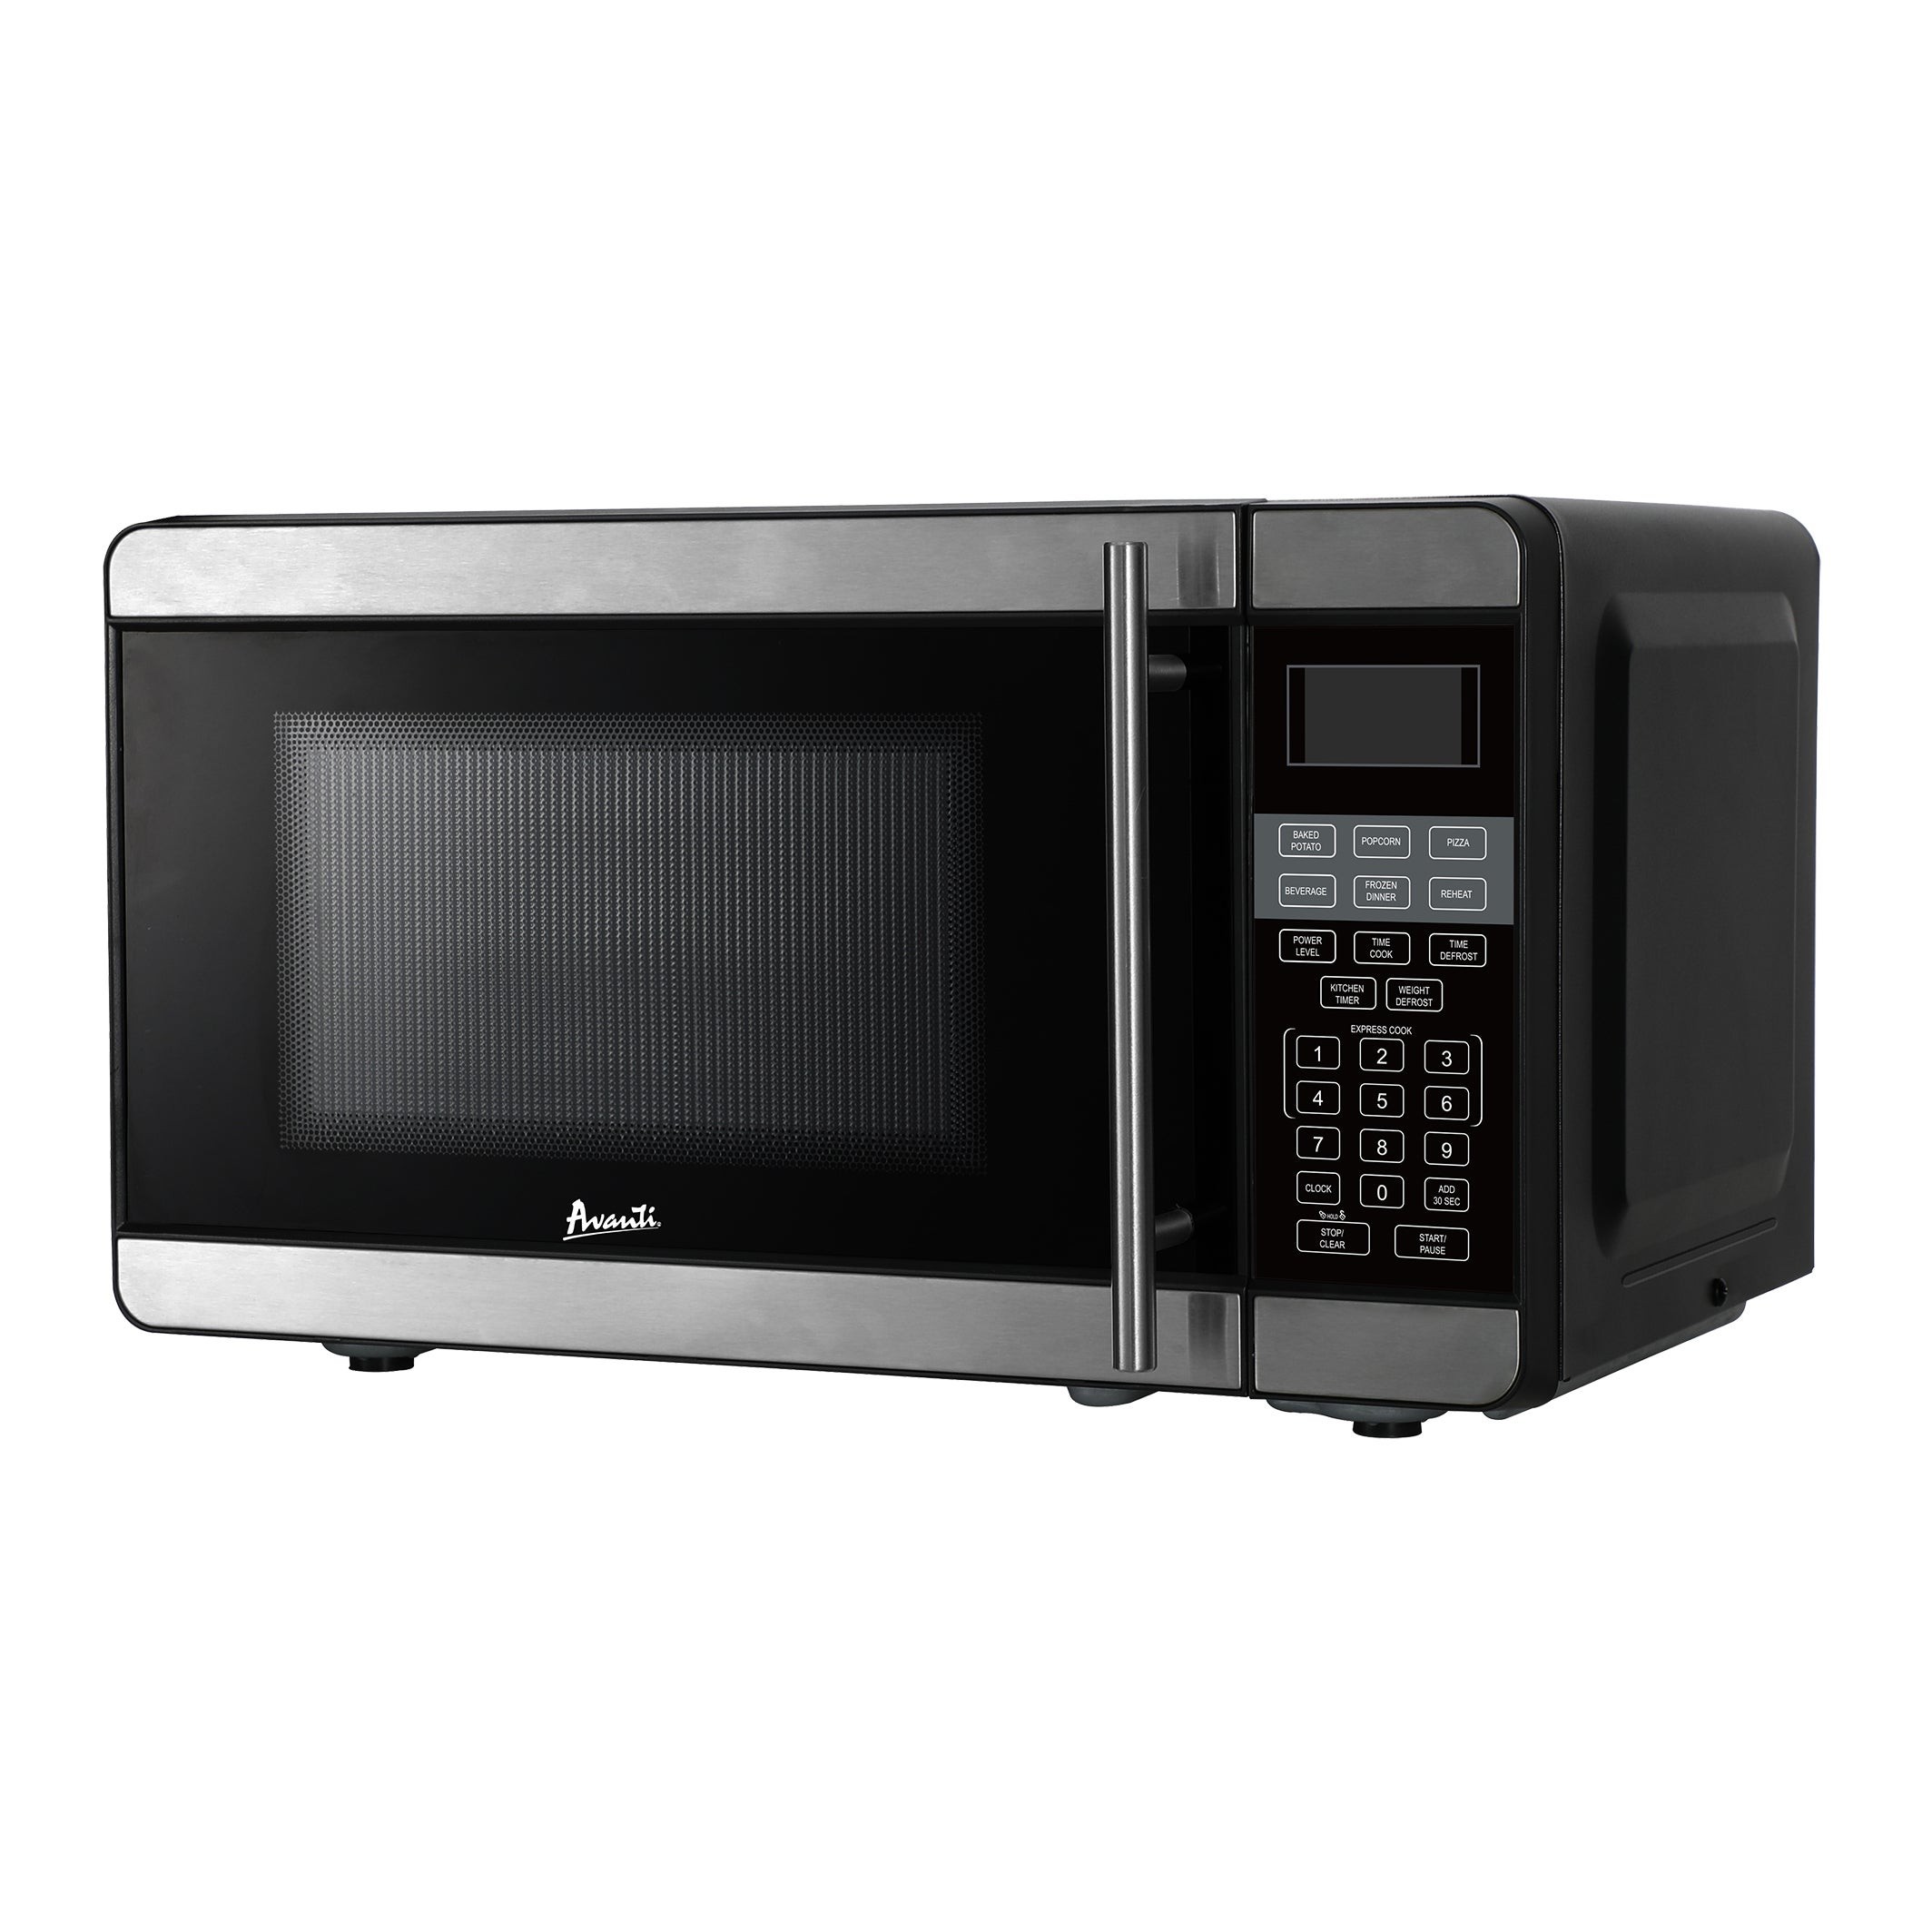 0.7 Cubic Foot 700W Micorwave Oven Stainless Steel w/ Black Cabinet